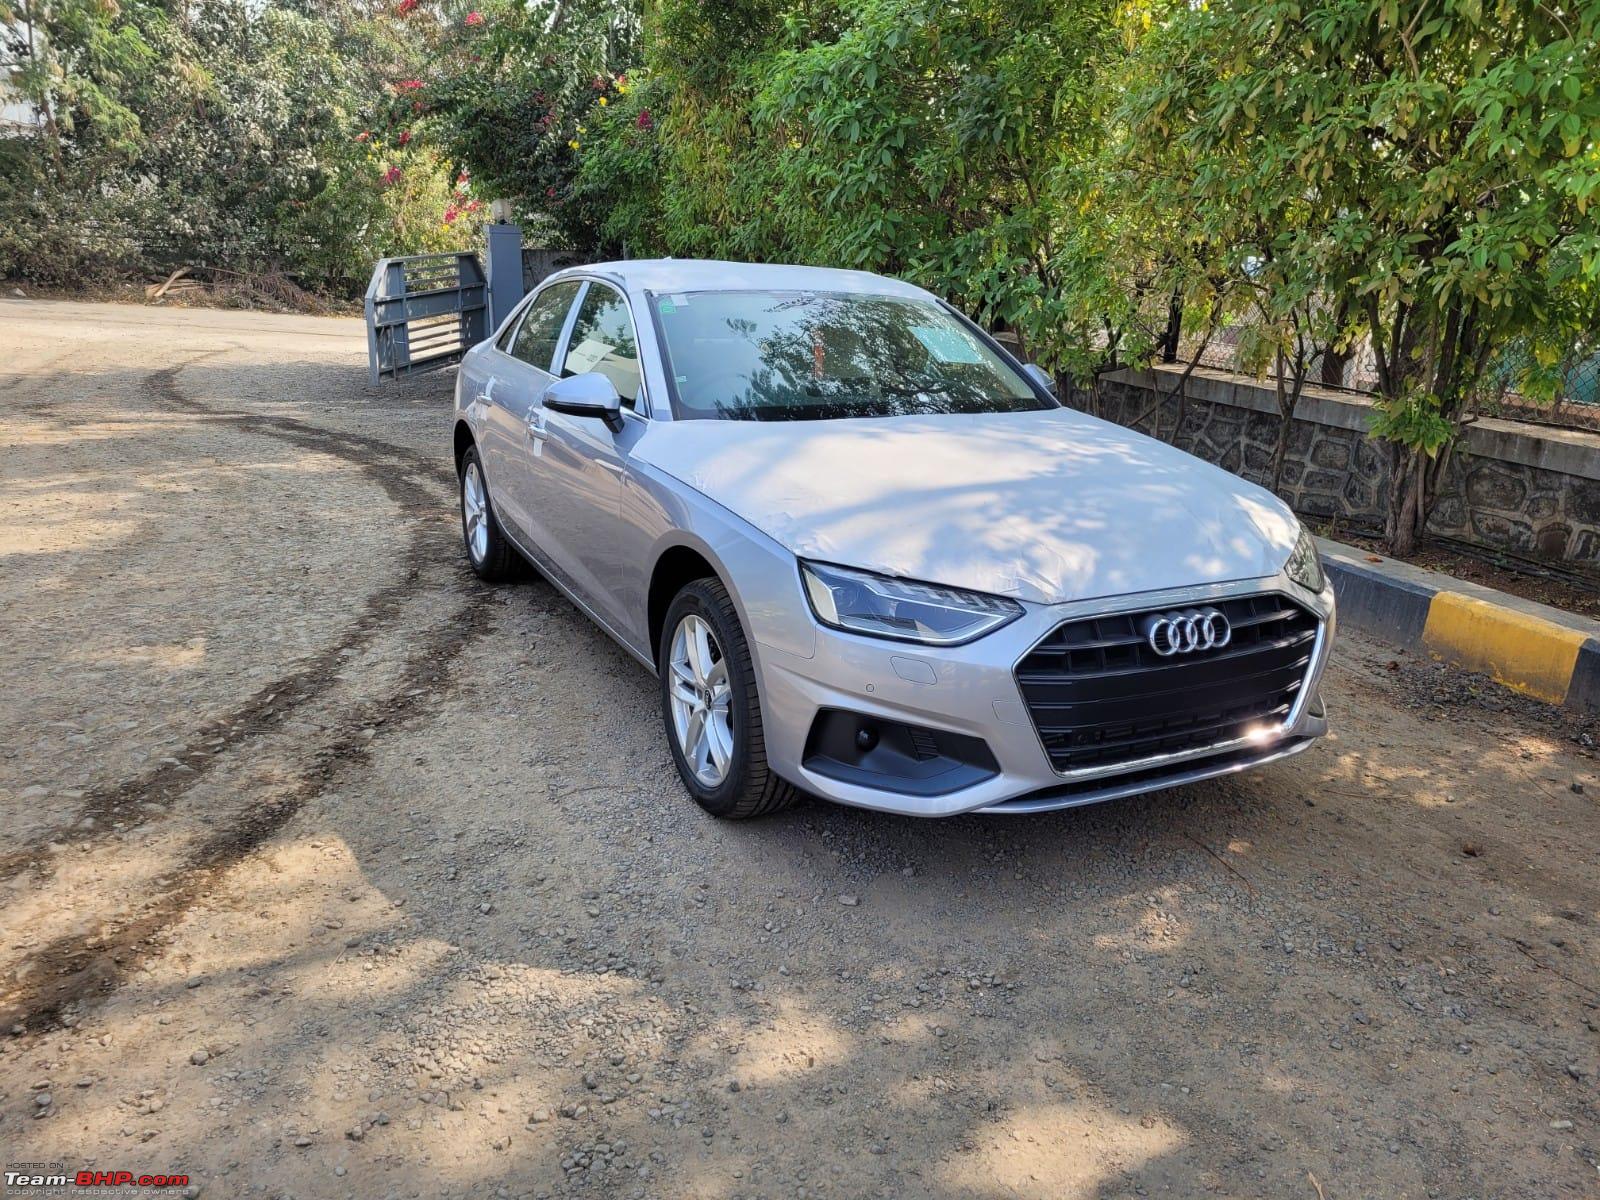 audi a4 price: Booking opens for 5th-gen Audi A4 at Rs 2 lakh - The  Economic Times